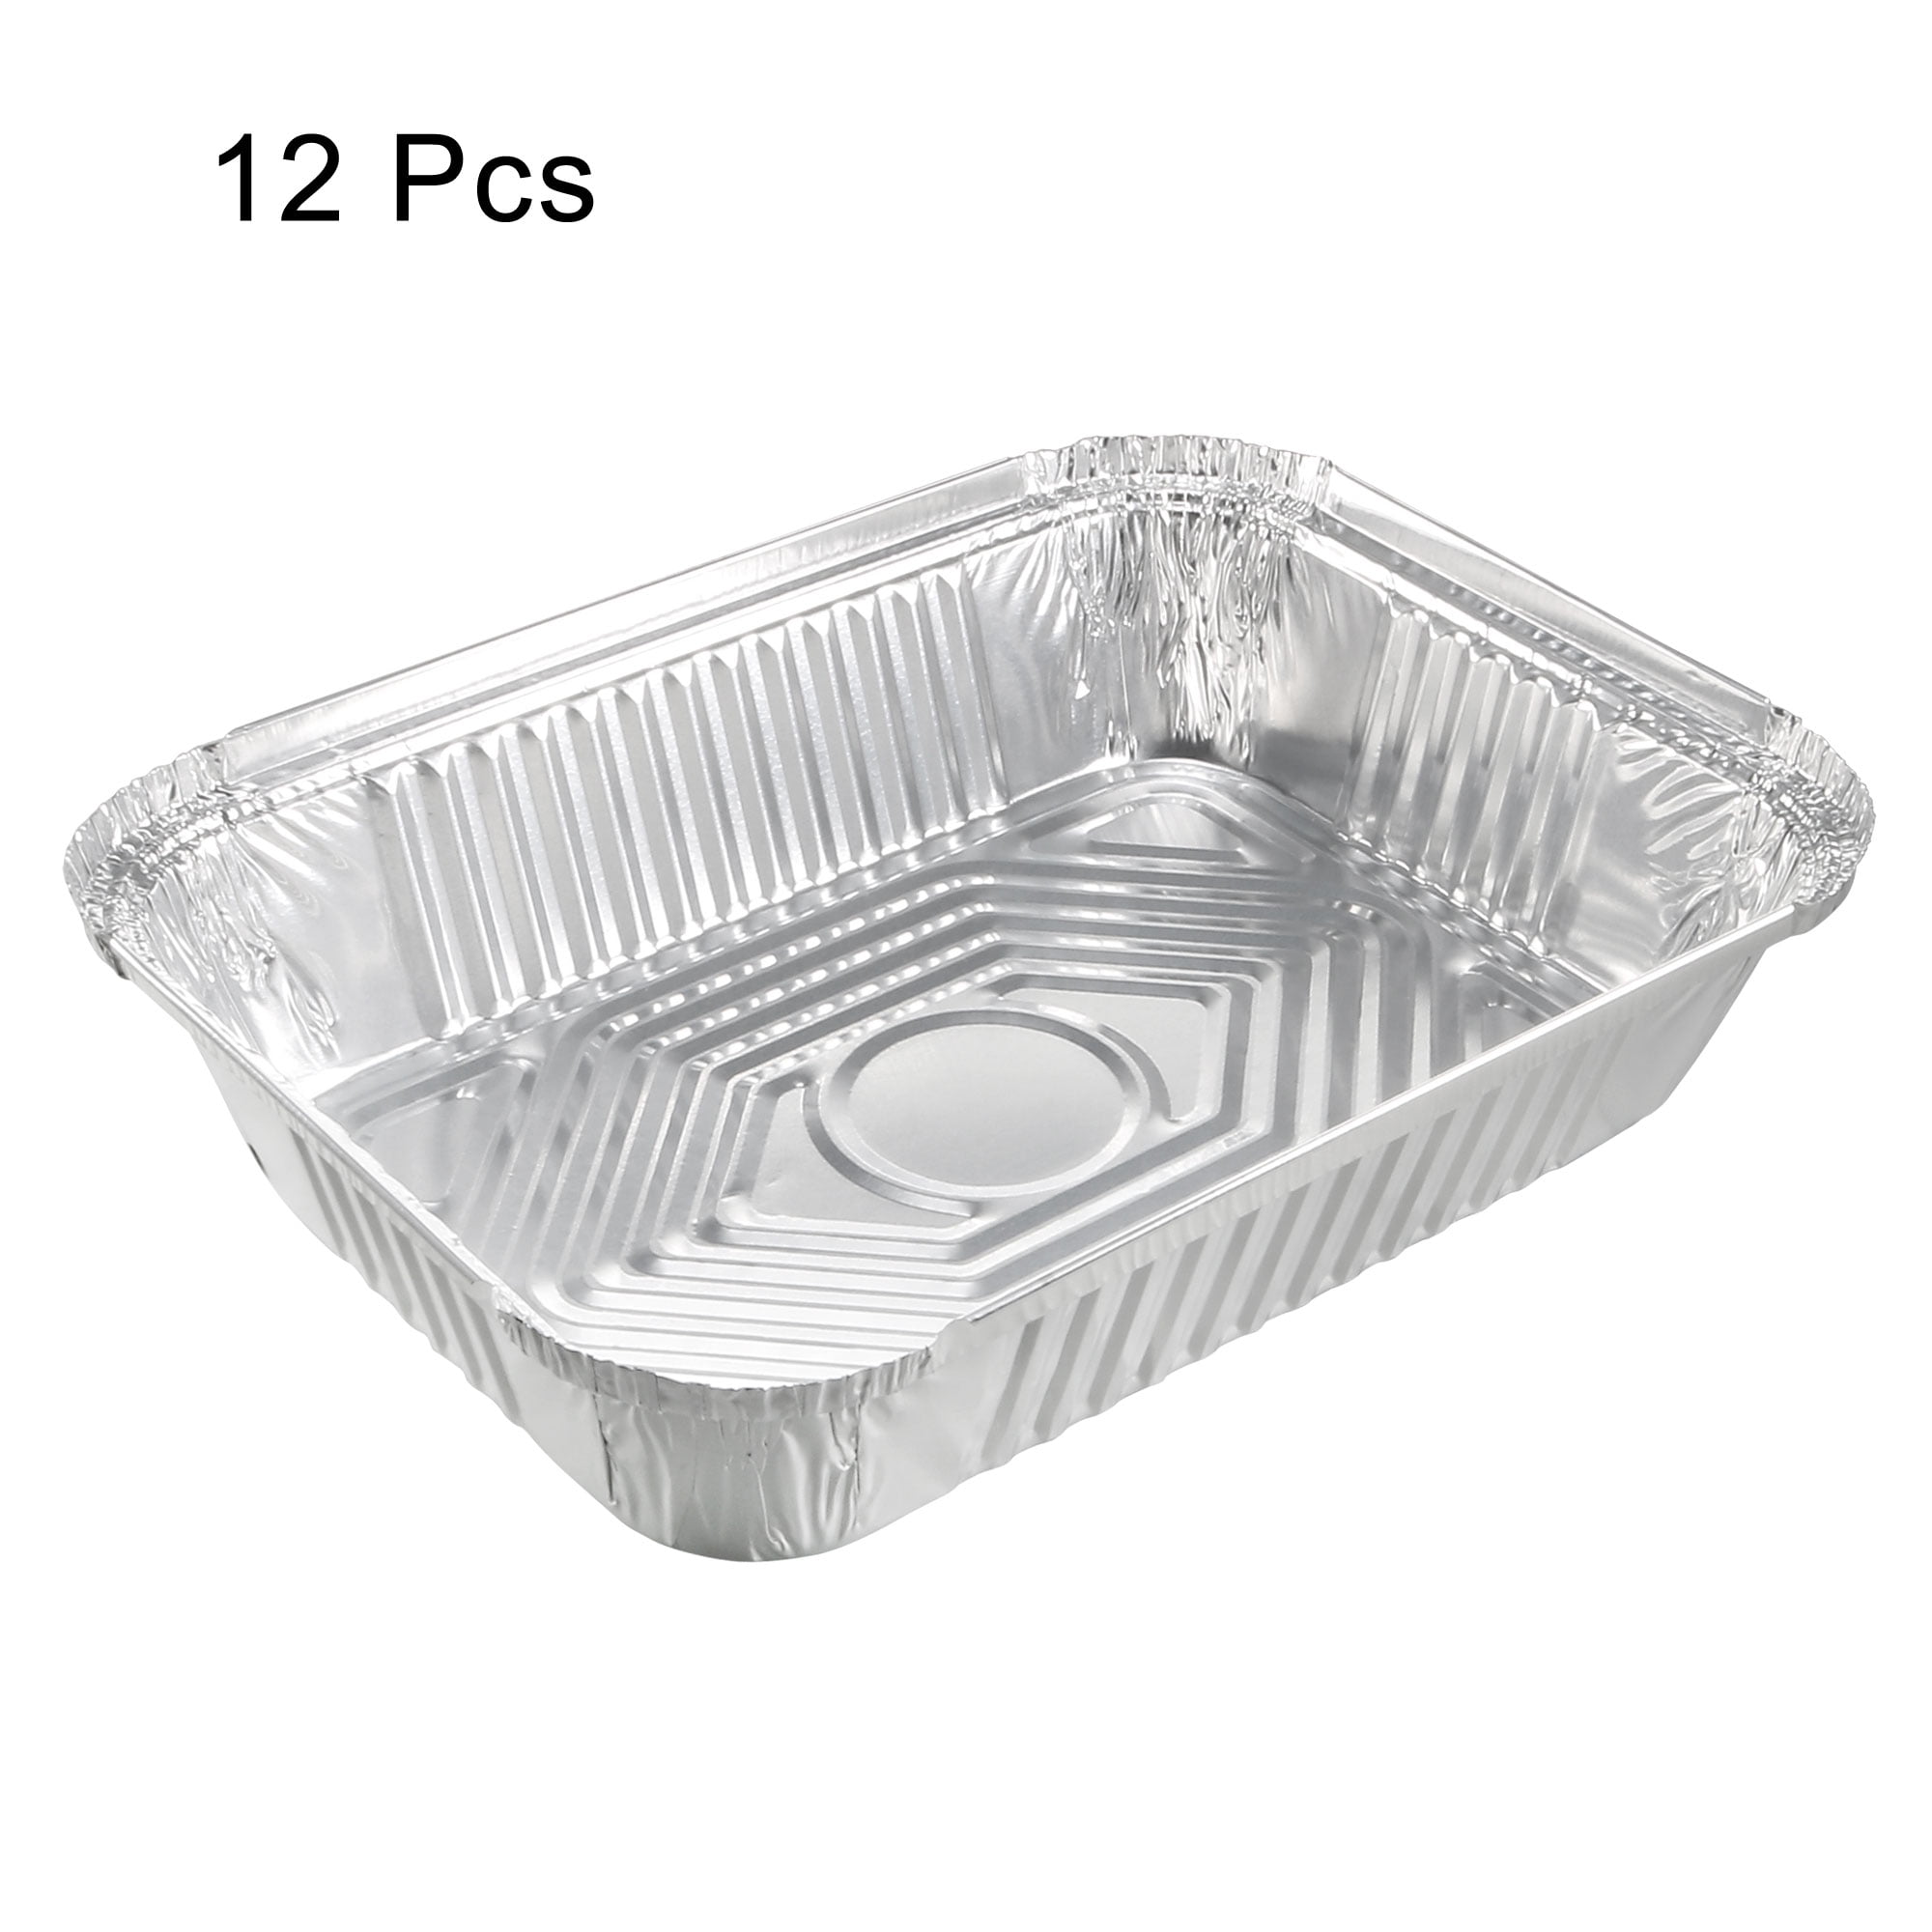 Kitcheniva Disposable Aluminum Foil Tray Pans 60 Packs, 60 pack - Fry's  Food Stores